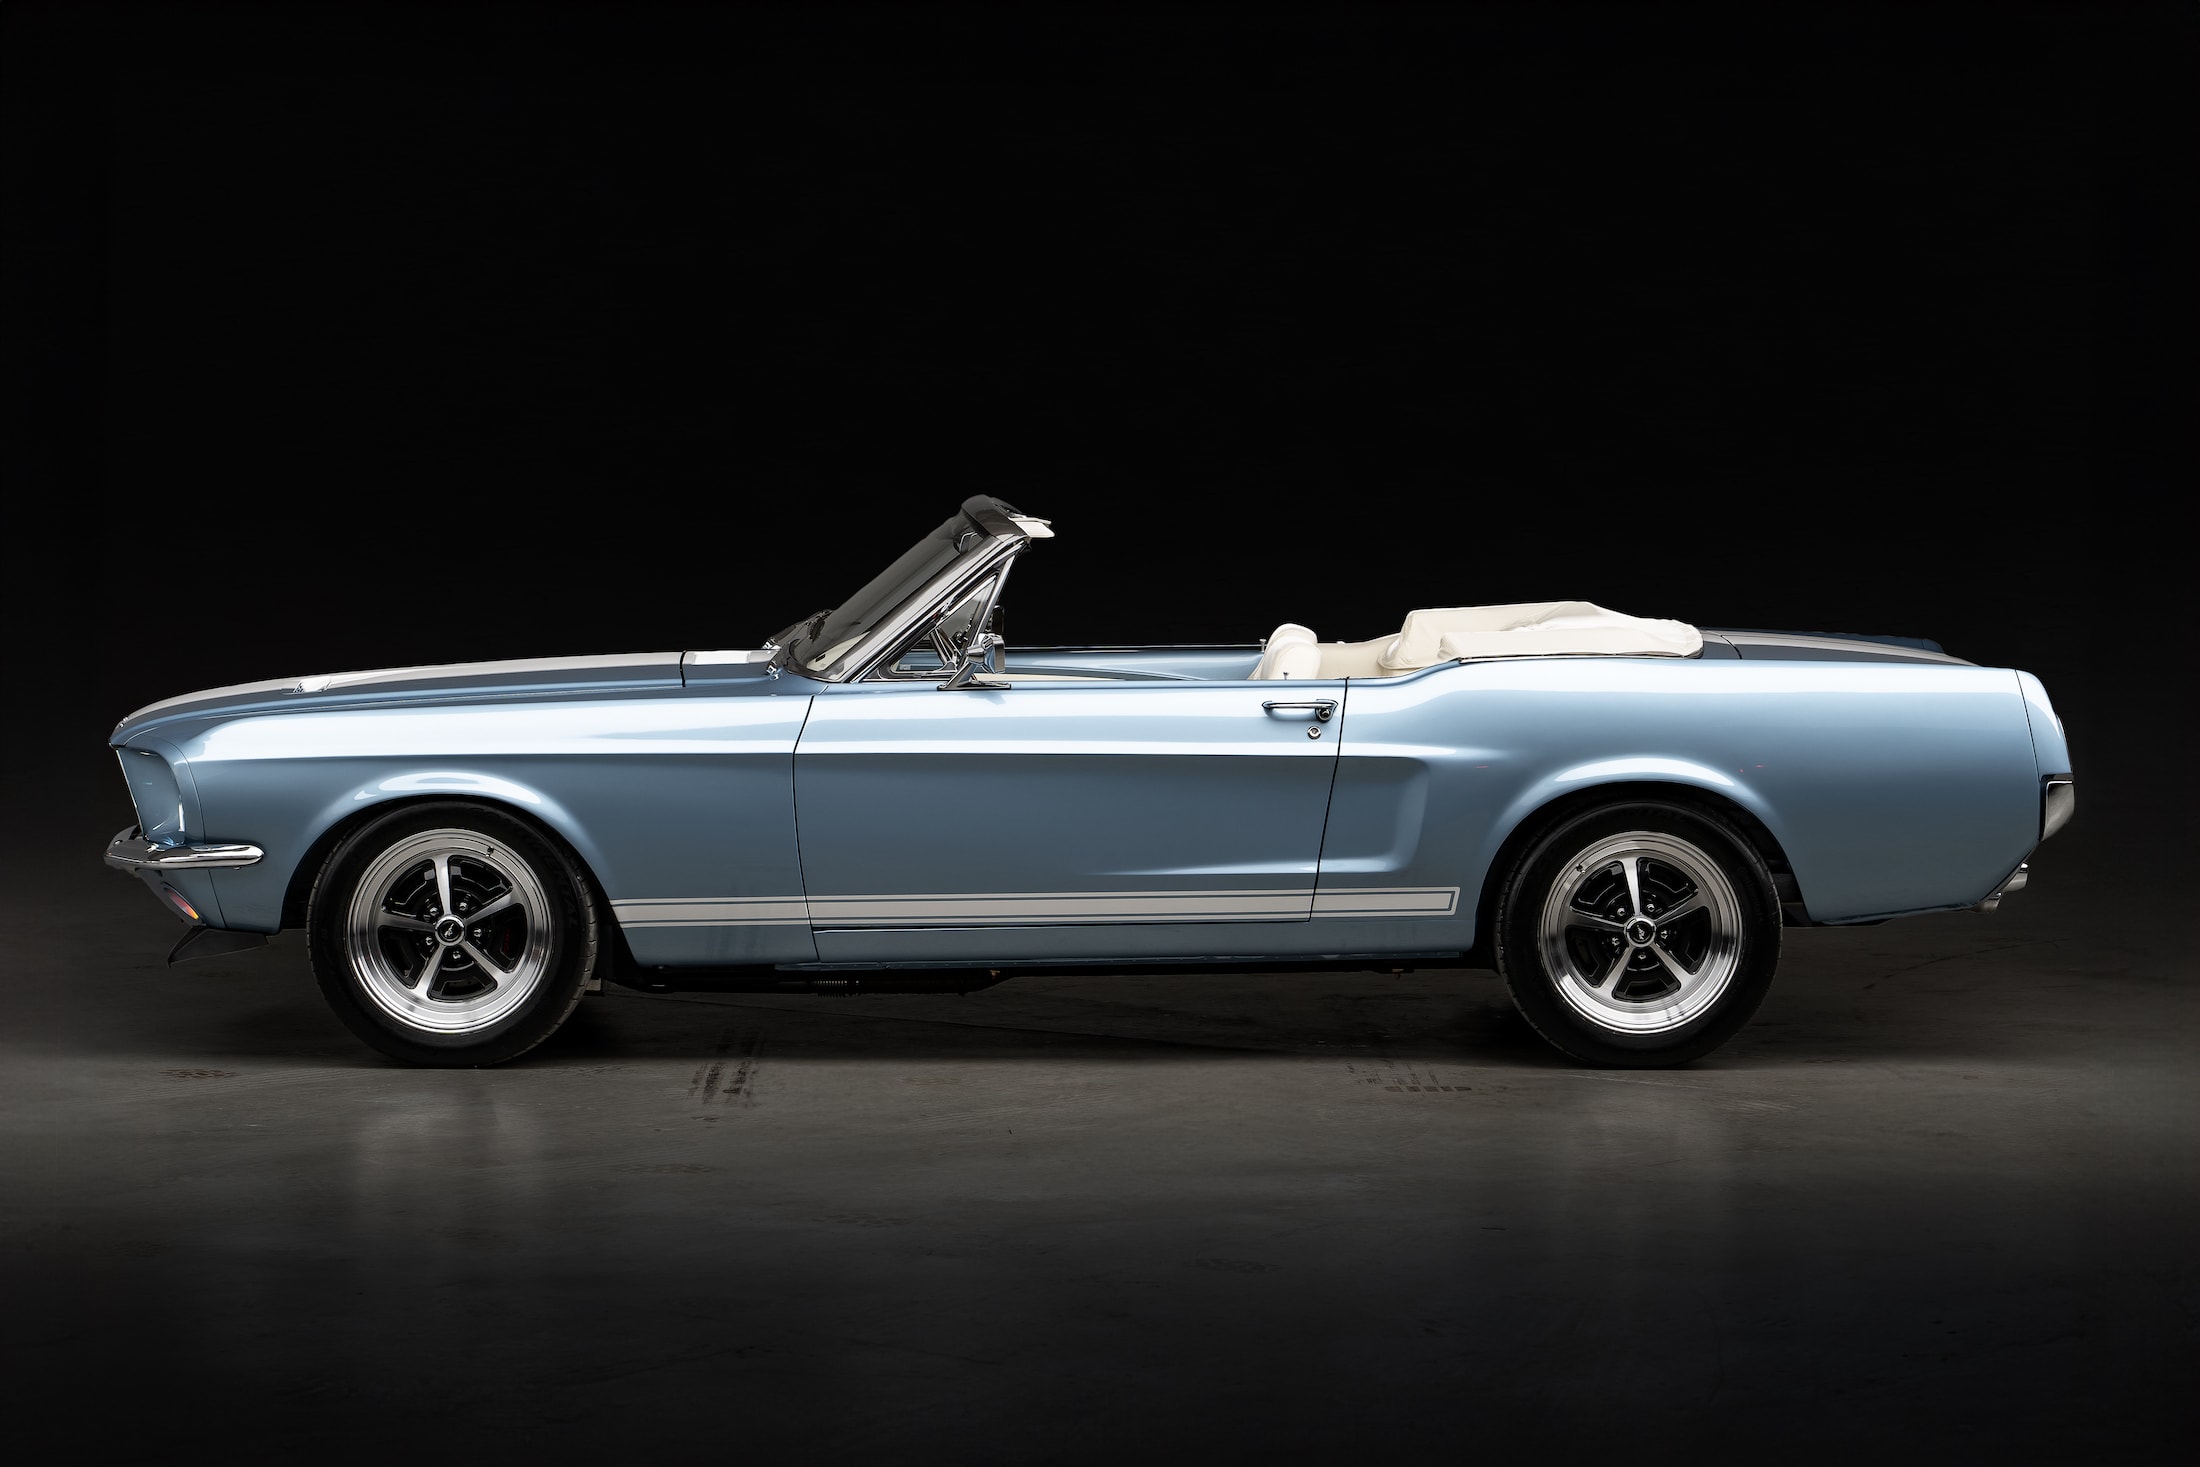 Velocity's Revamped Mustang Convertible